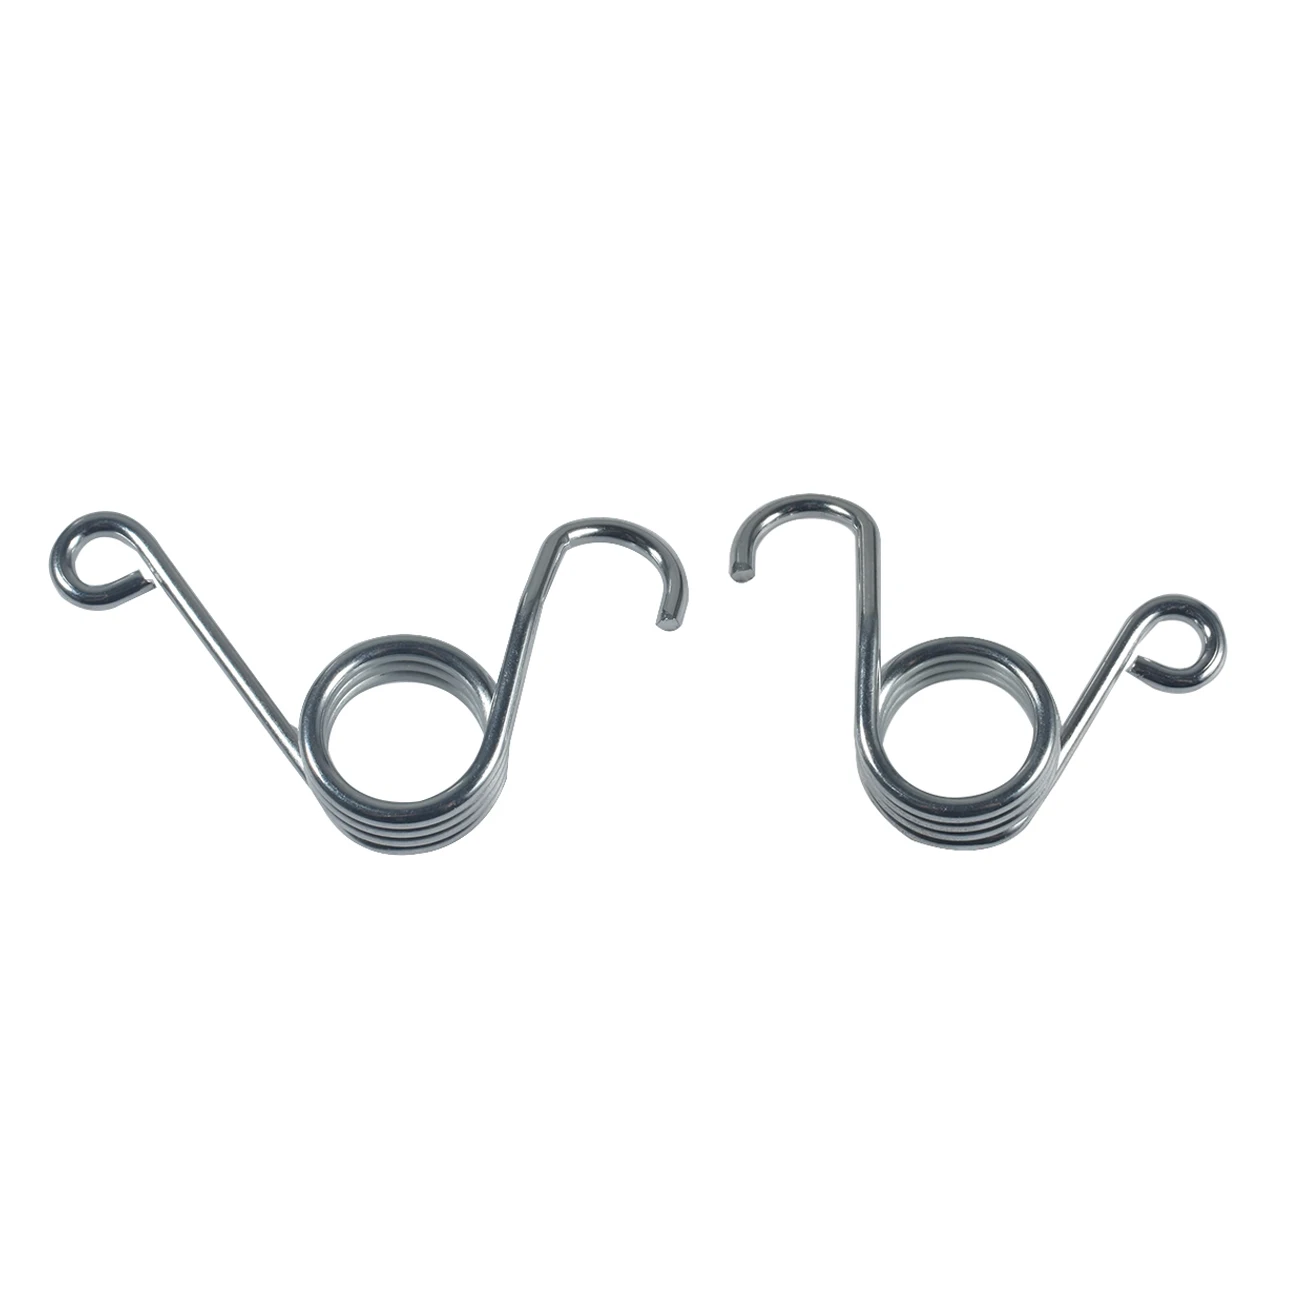 Throttle Pedal and Brake Return Springs 9502-9503 Compatible with Manco/American Sportworks